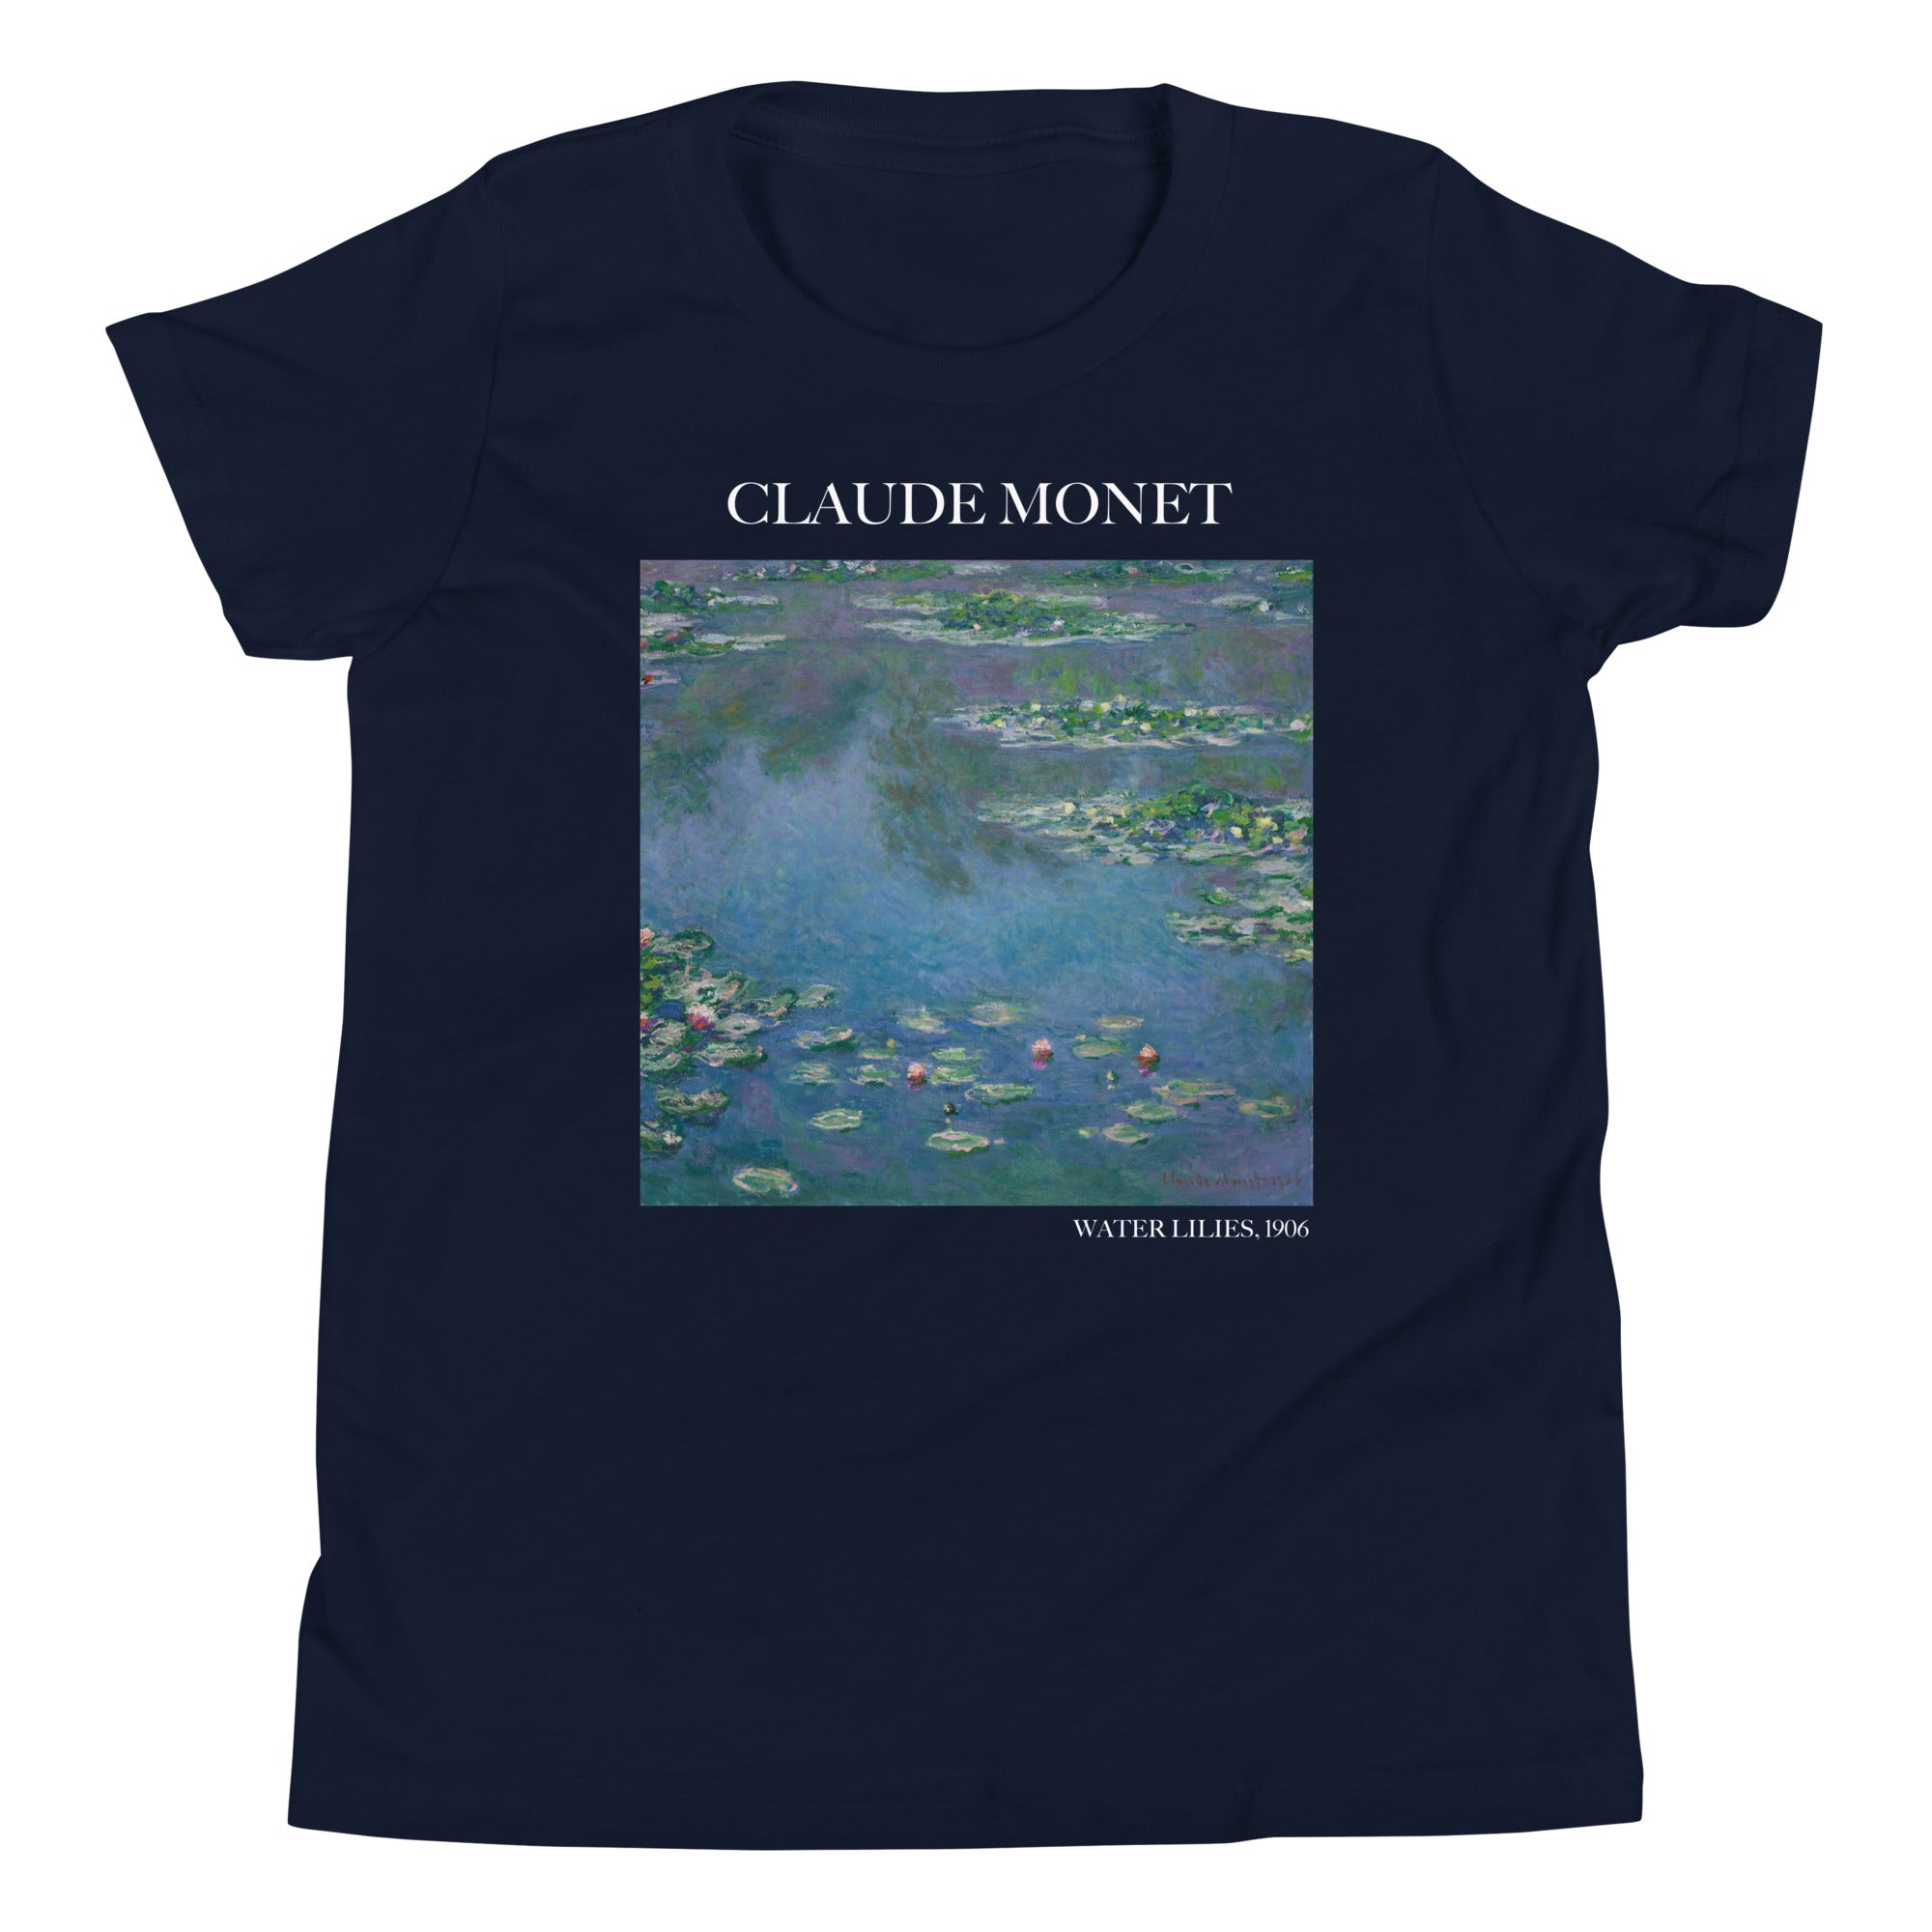 Claude Monet 'Water Lilies' Famous Painting Short Sleeve T-Shirt | Premium Youth Art Tee